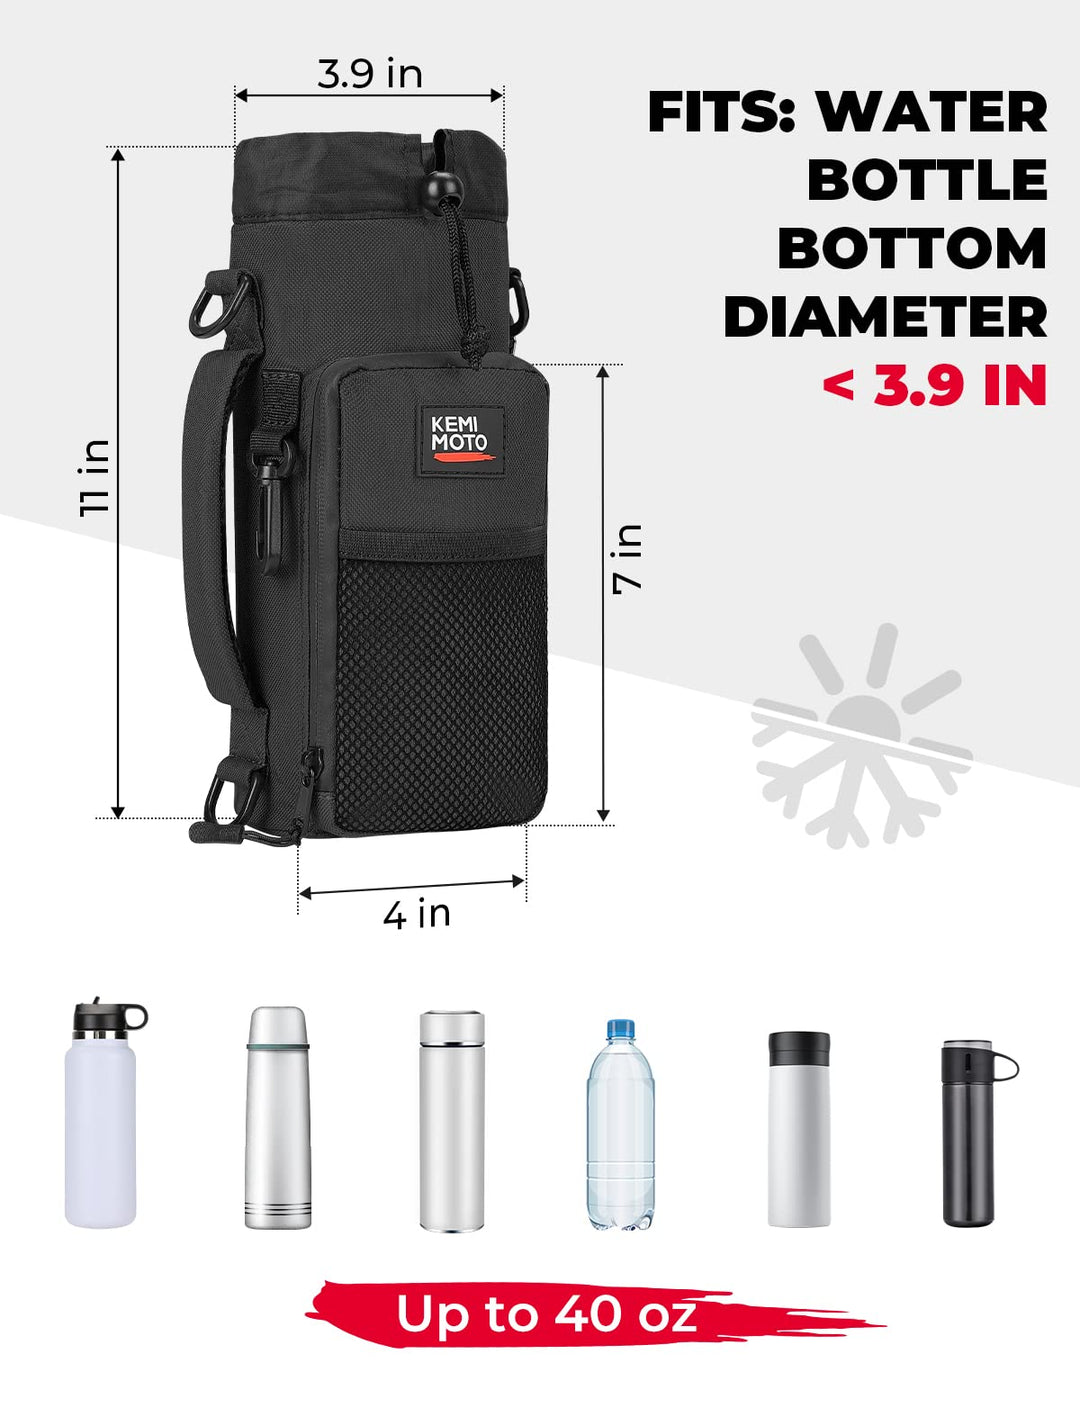  TMEOIIPY Water Bottle Holder with Strap & Pockets for